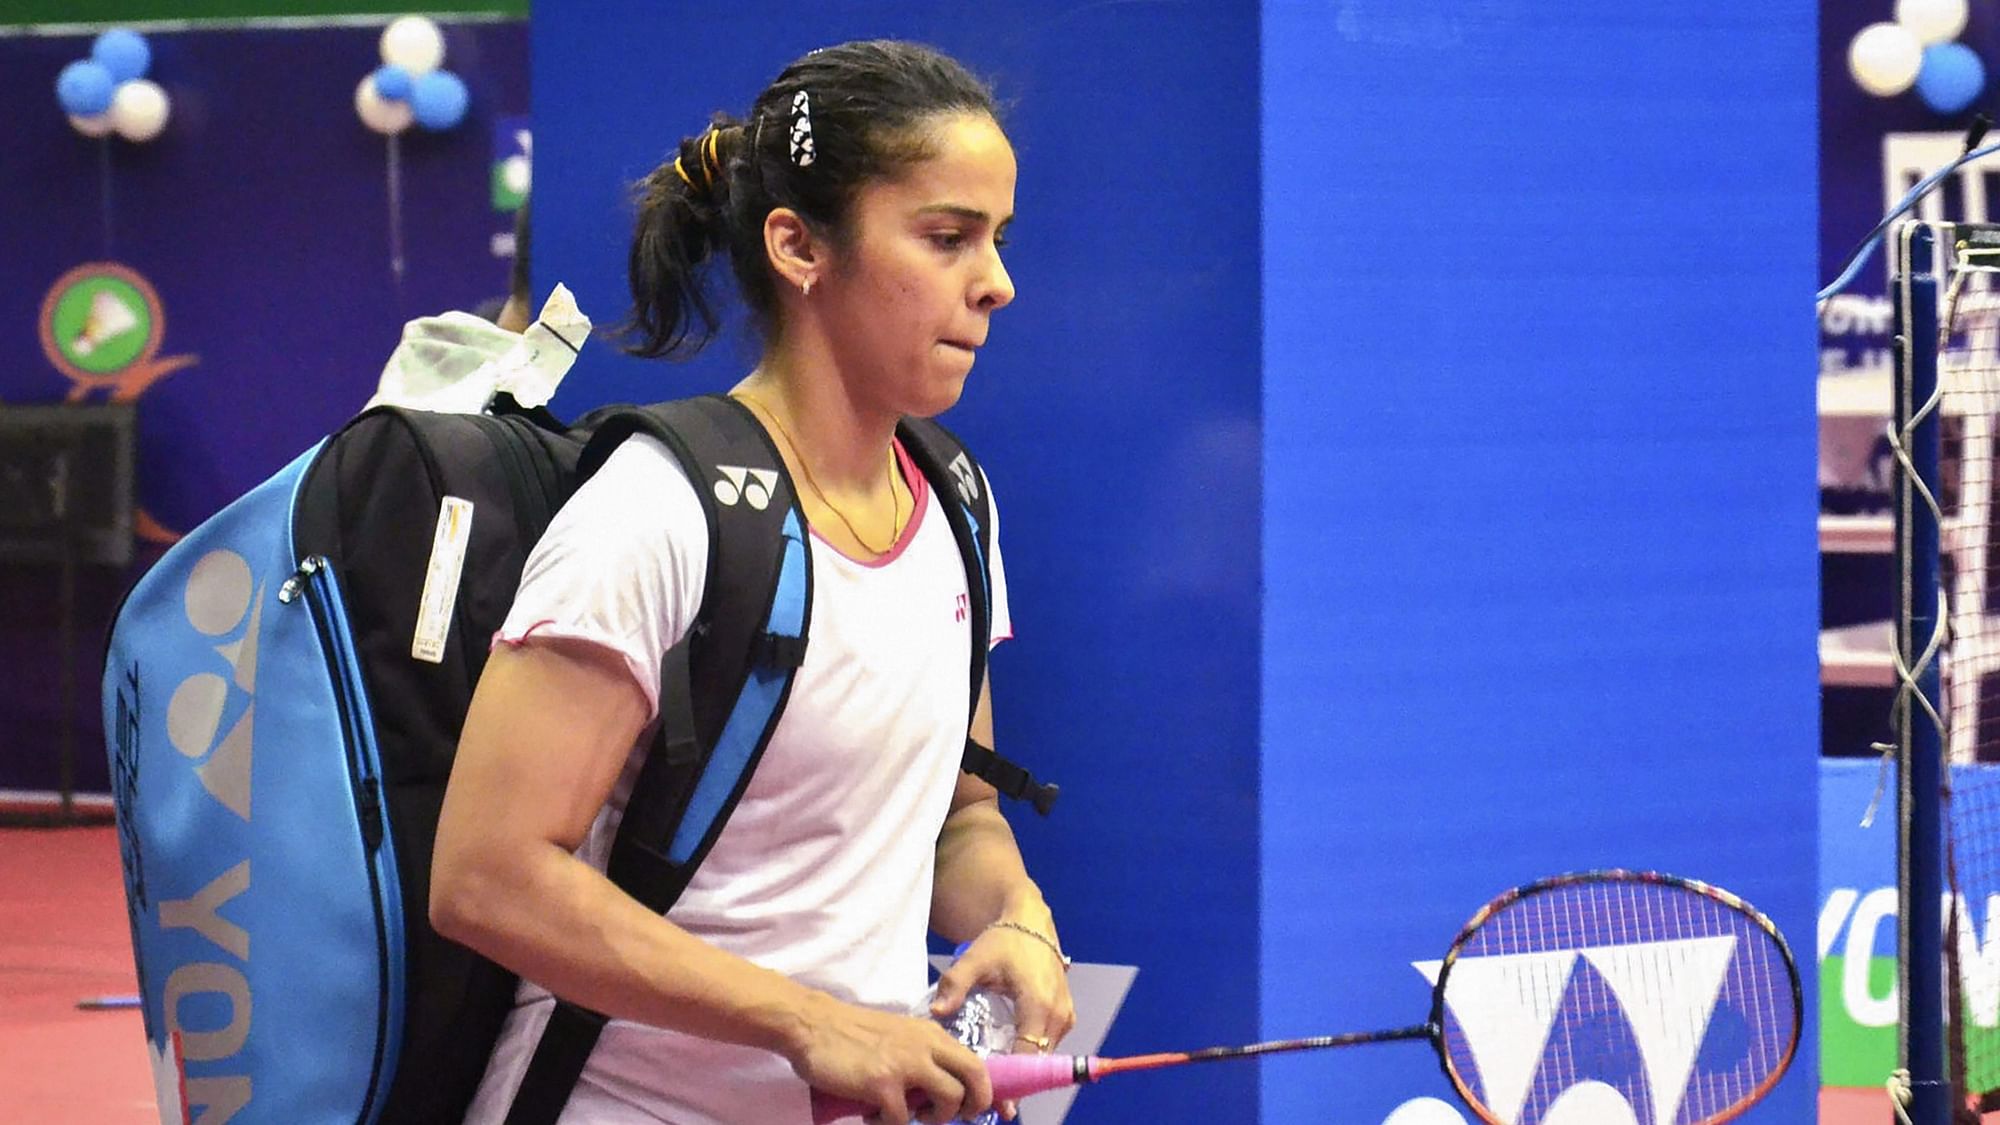 Saina Nehwal has been knocked out in the opening round of the China Open.